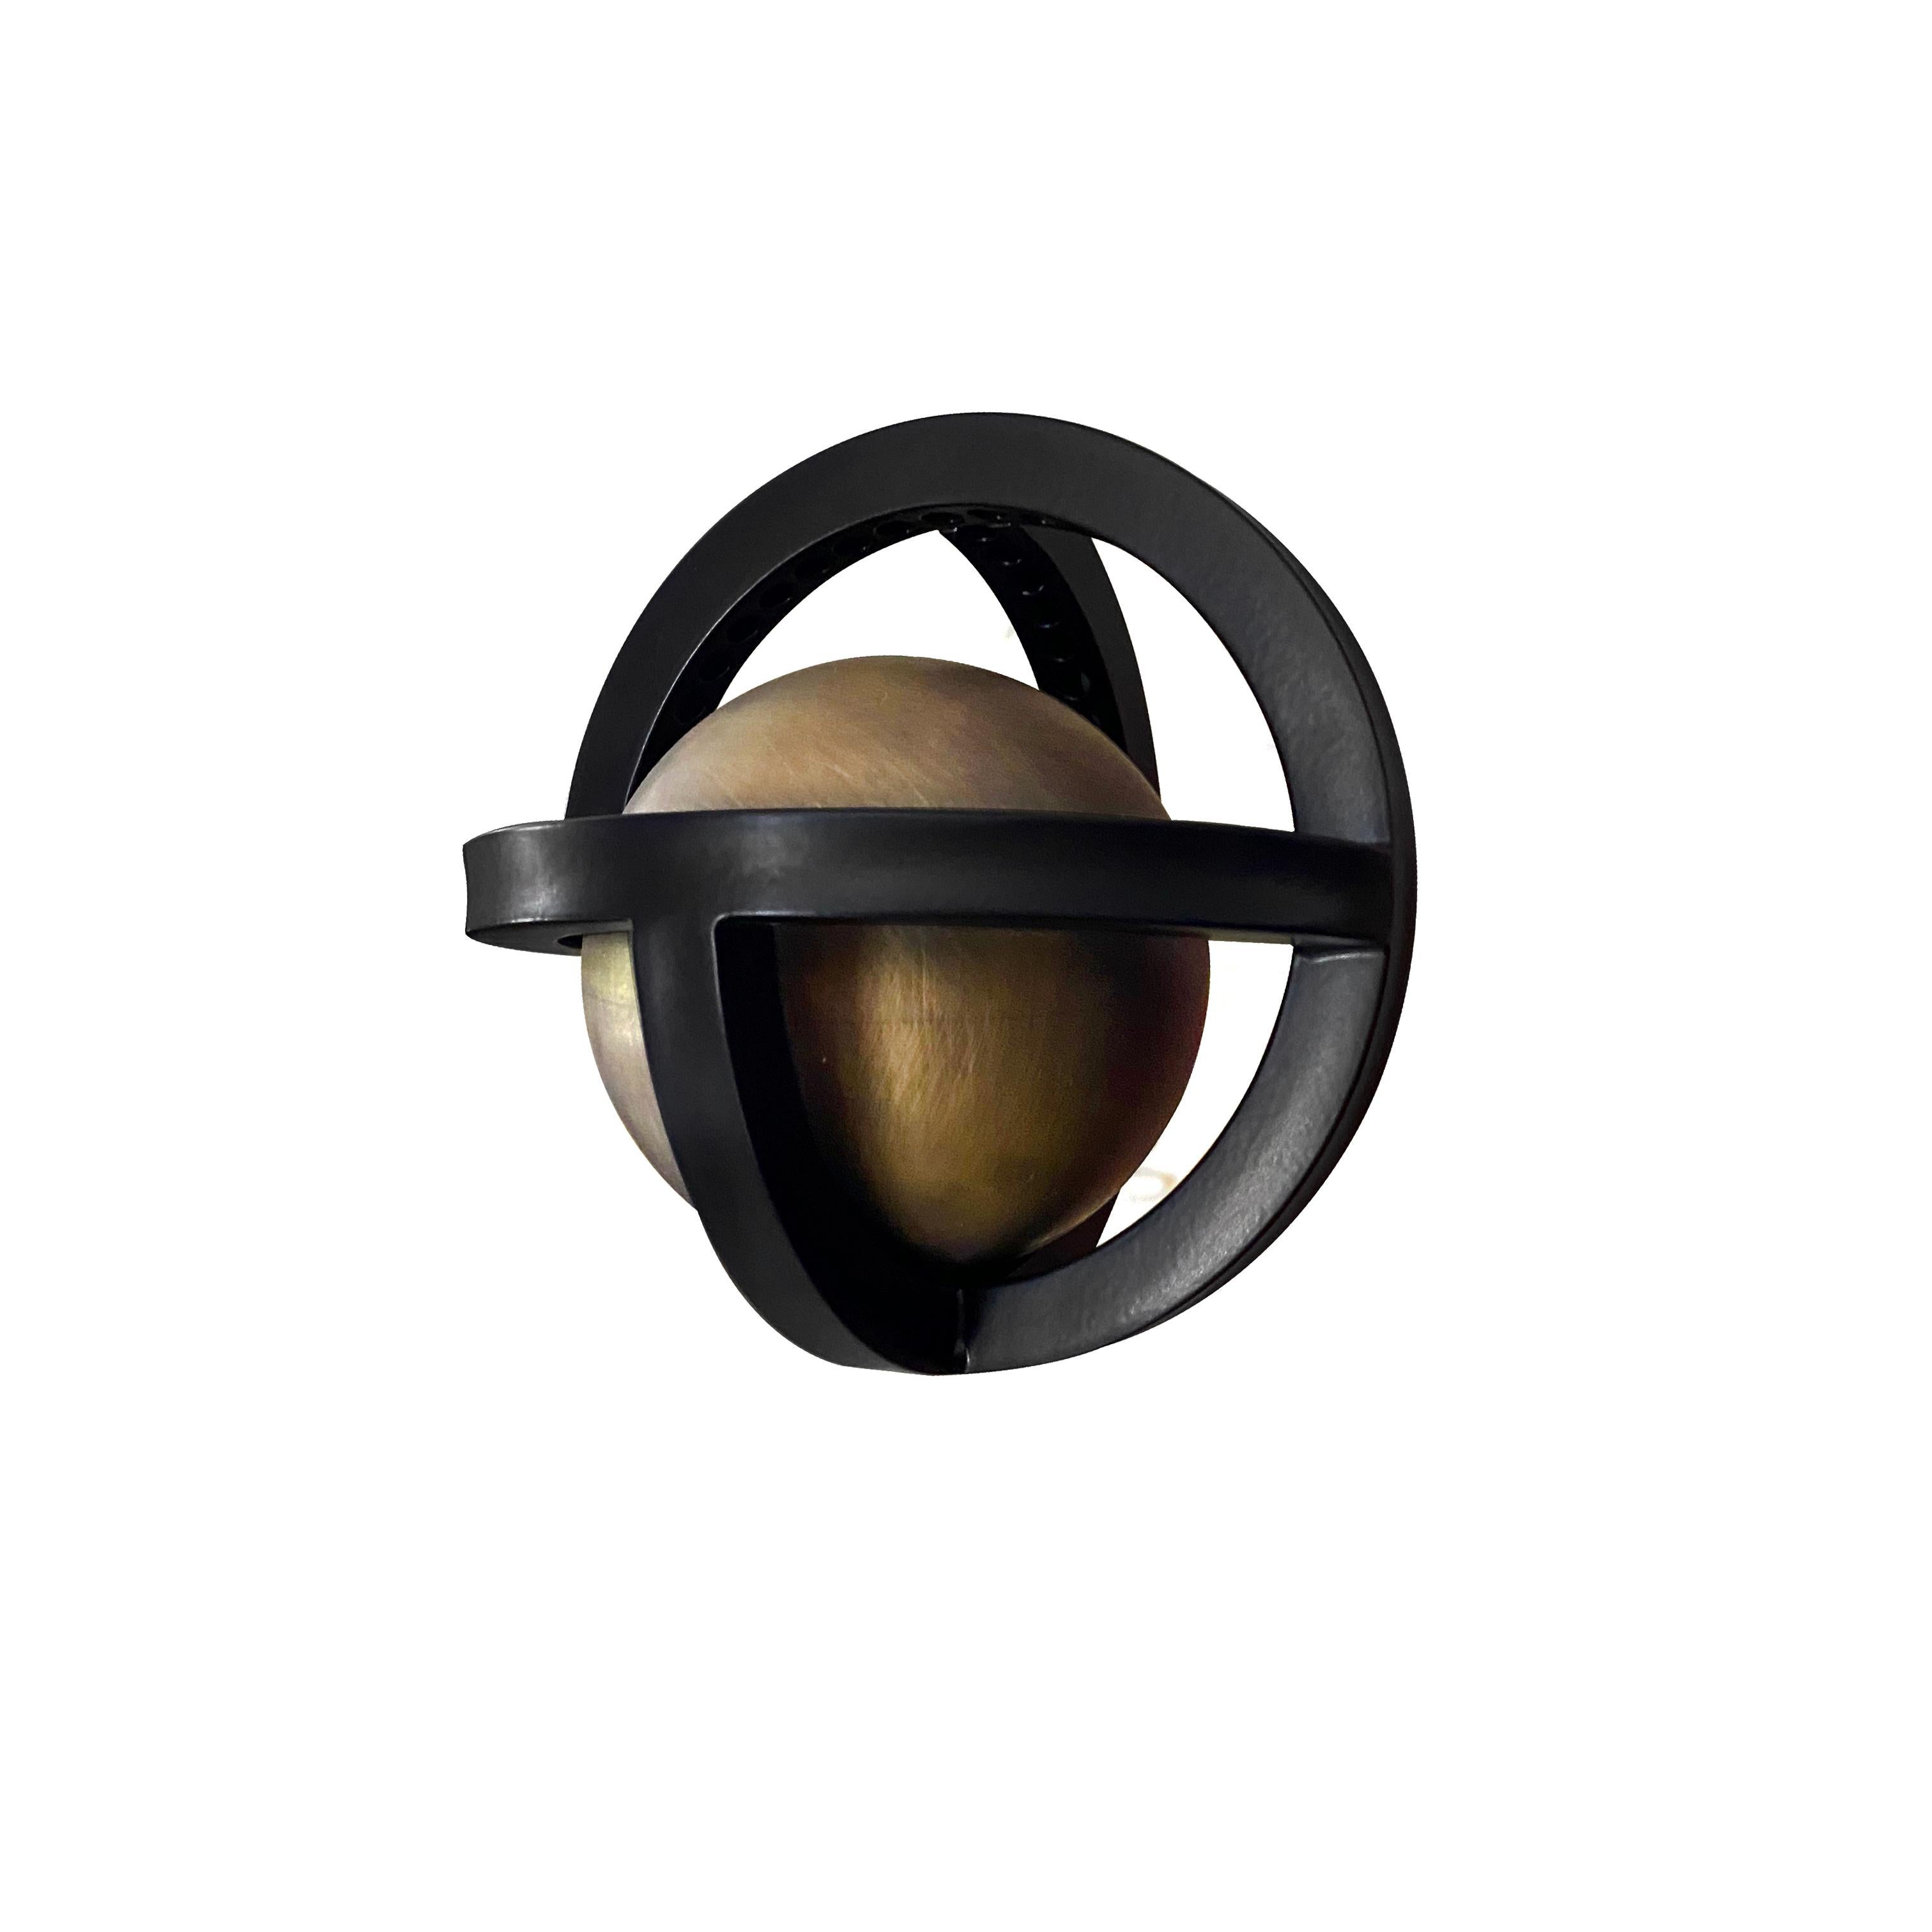 New addition to Planetaria collection. Both geometric and organic, the light represents an exploration of the globe created by folding and rotating three flat circles to create a single sphere, encasing a reflective orb.

The light is illuminated